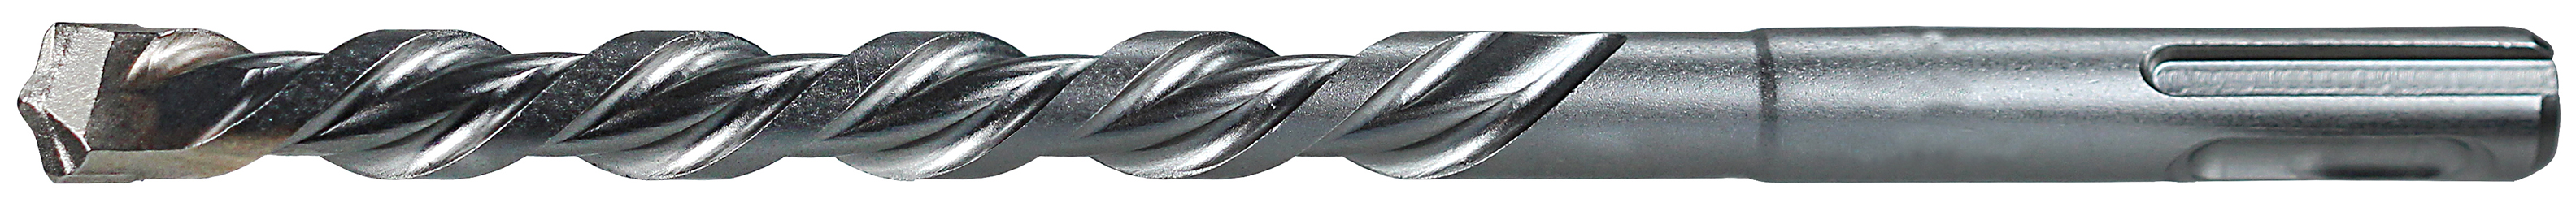 Rotary Hammer Drill Bit, 3/16 in. bit diameter, 12 in. overall length, Straight shank type, 3 flutes, Tip-Carbide material, 10 in. drilling depth